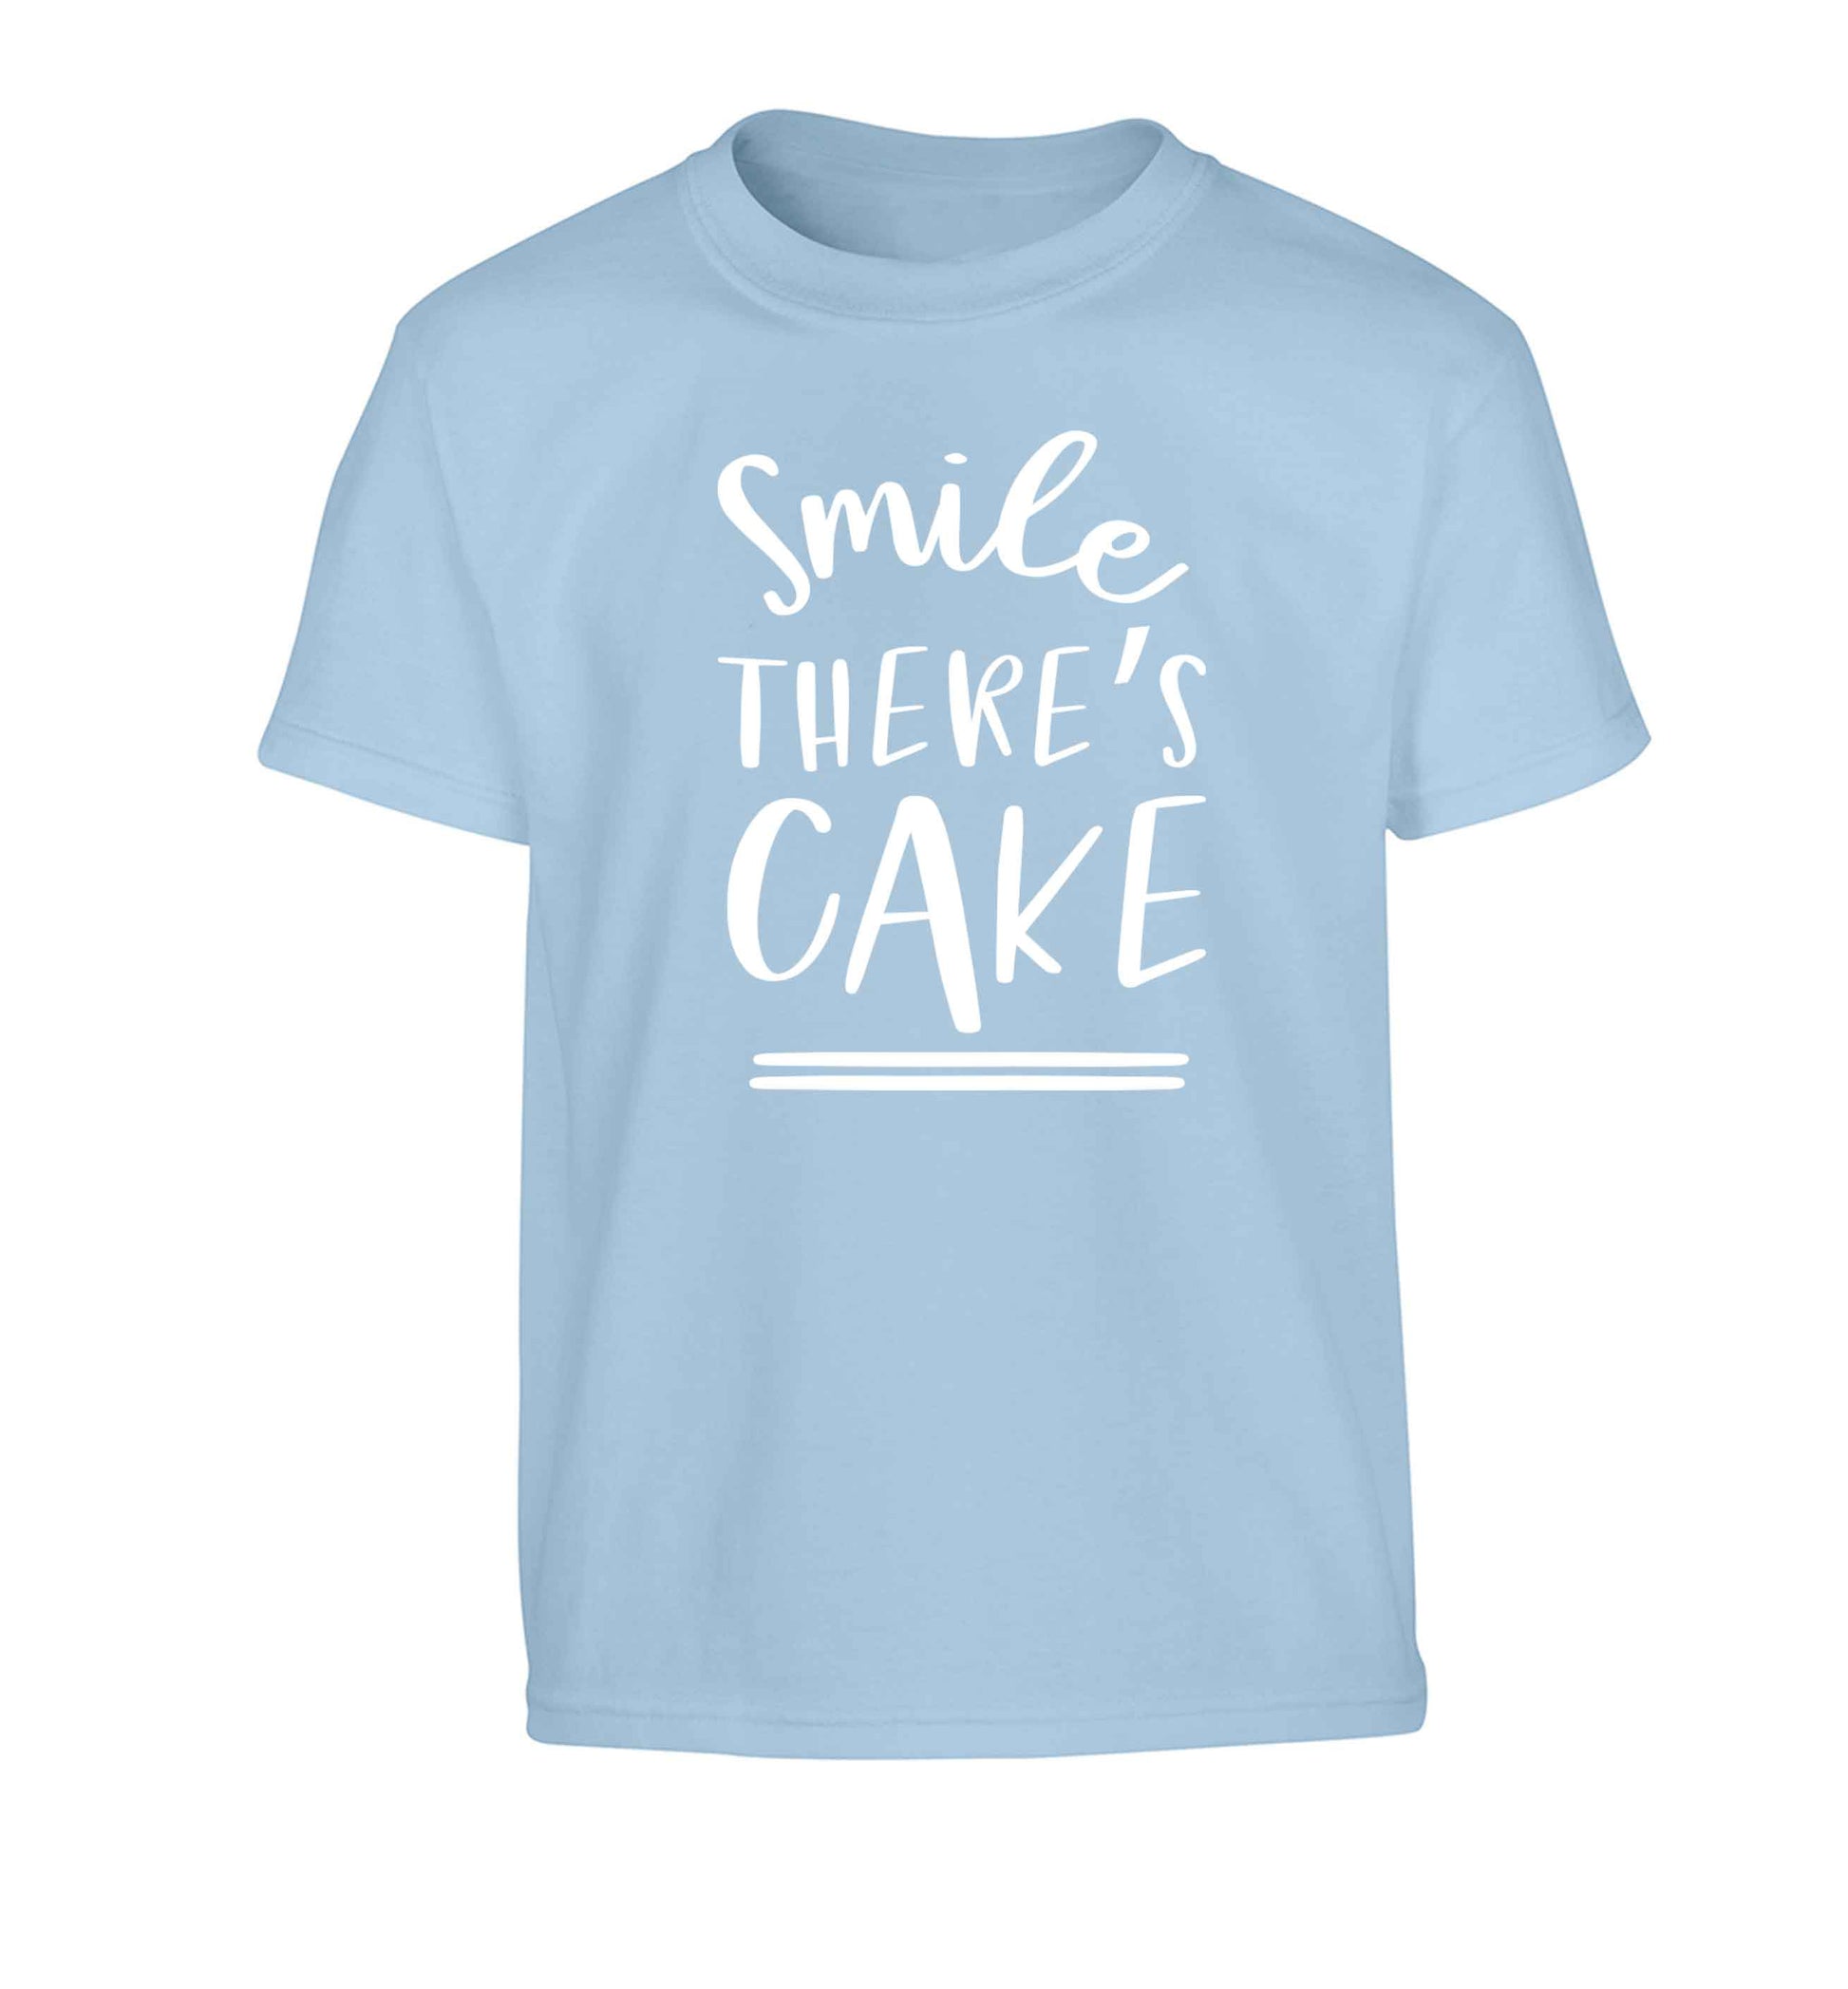 Smile there's cake Children's light blue Tshirt 12-13 Years